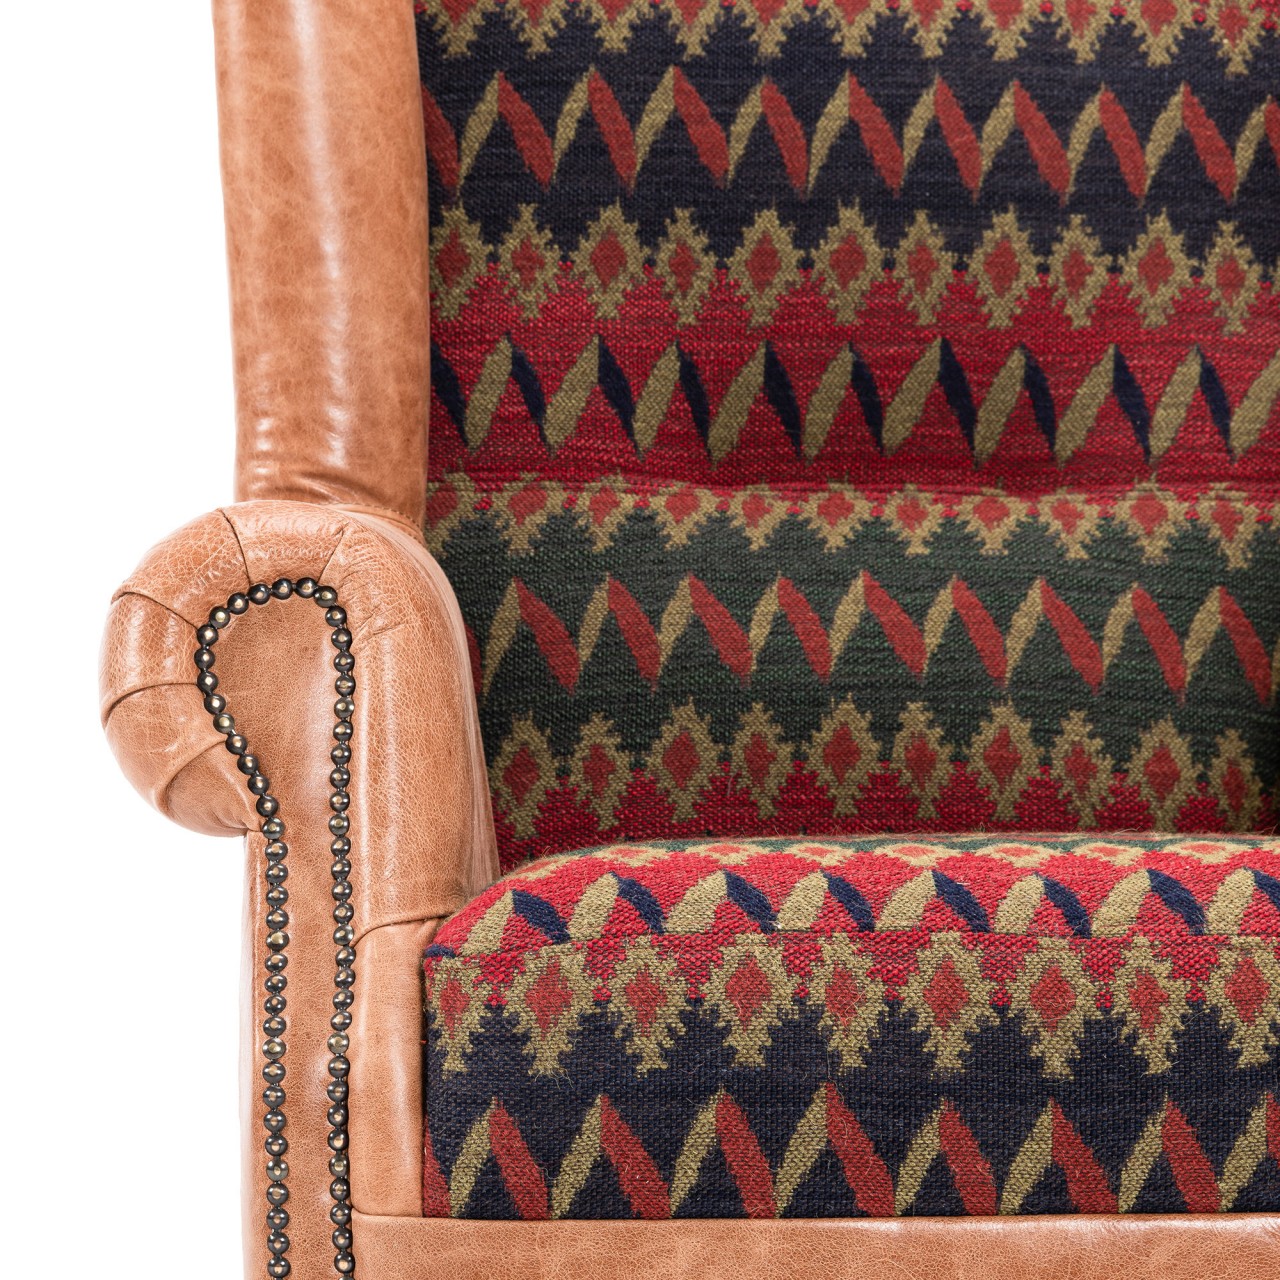 BRYANT WING CHAIR - CORTINA fabric and CAMBRIDGE HAZELNUT leather